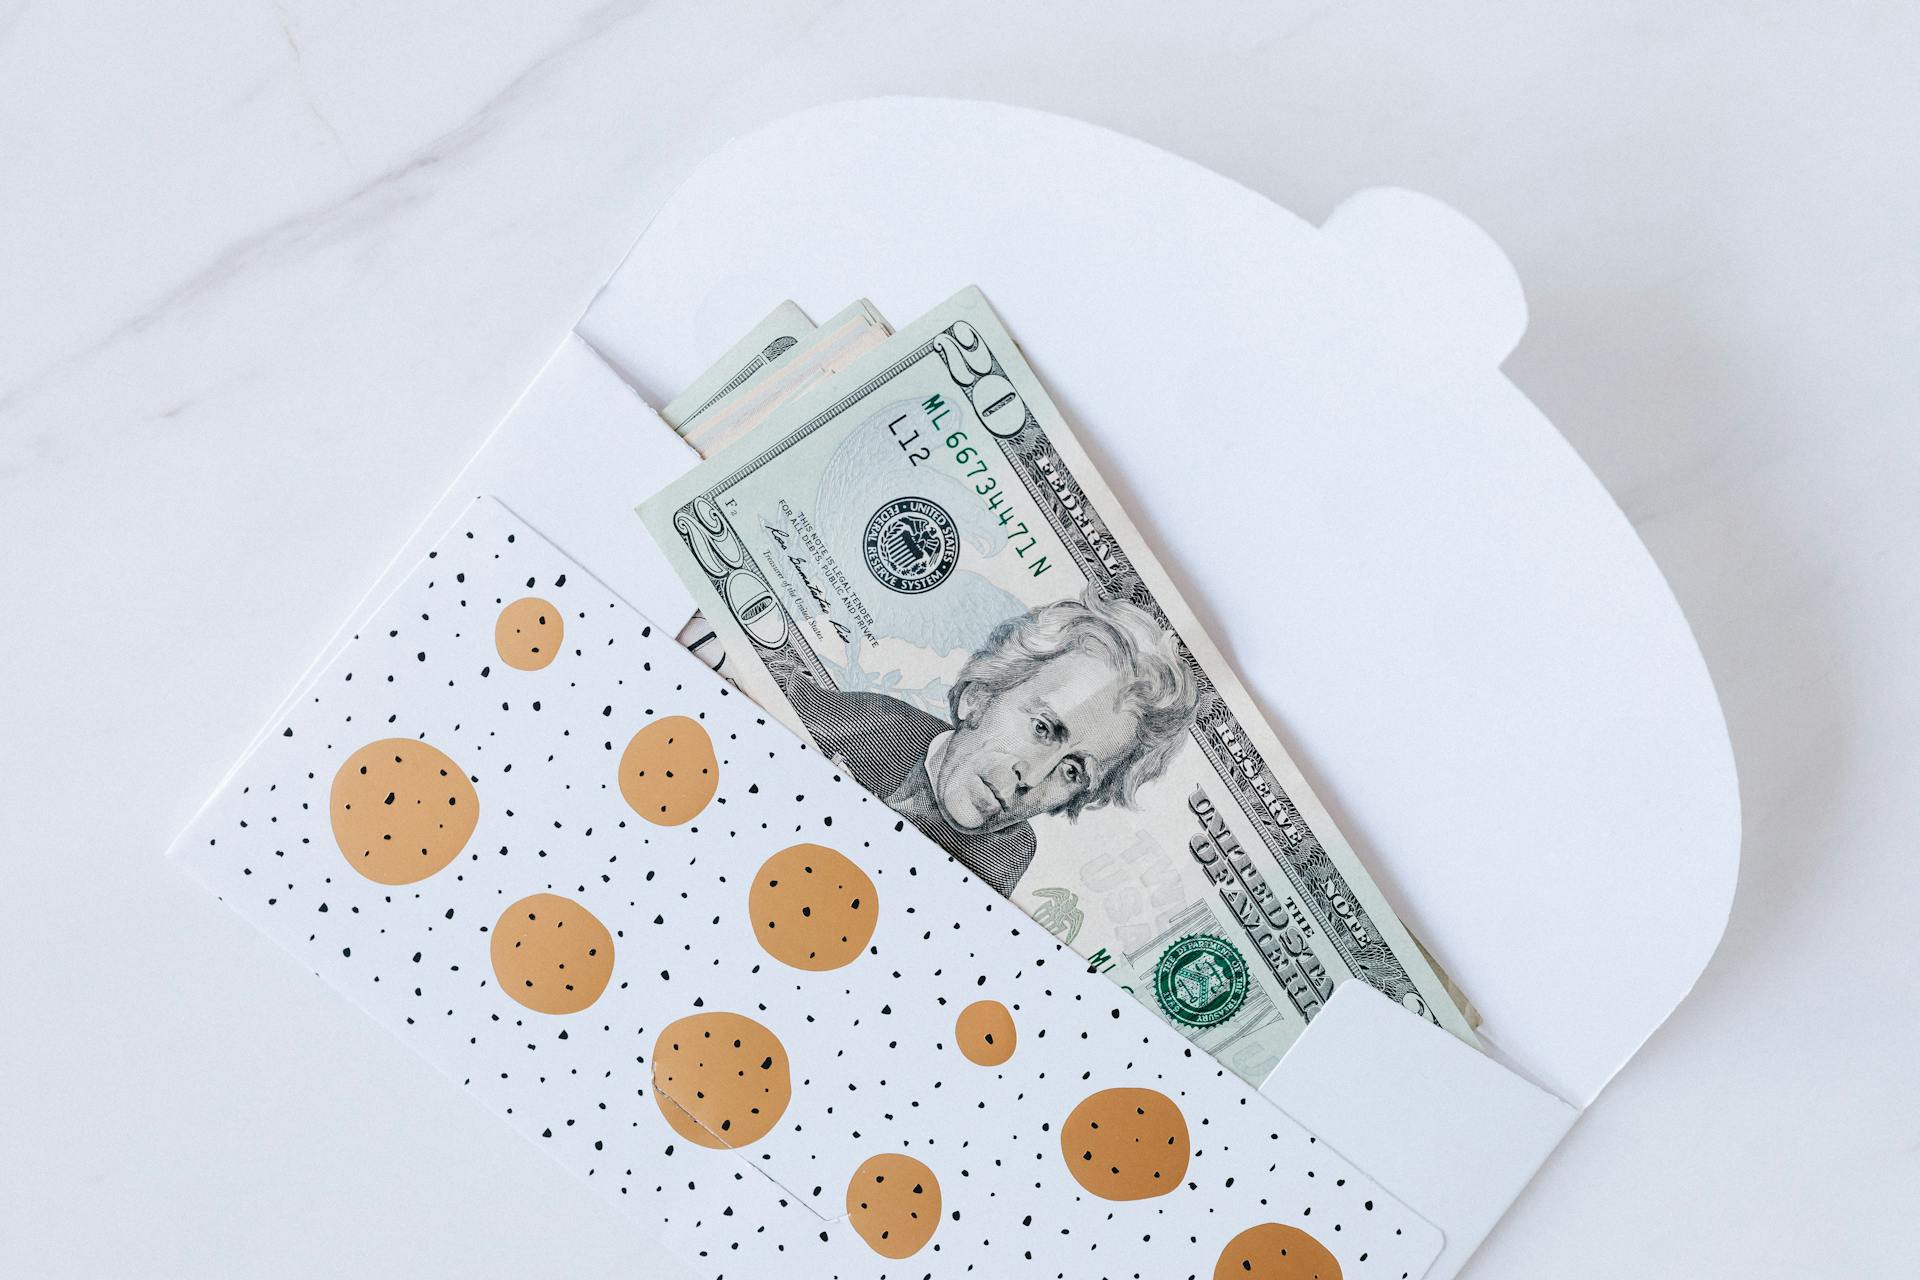 An envelope containing dollar banknotes | Source: Pexels